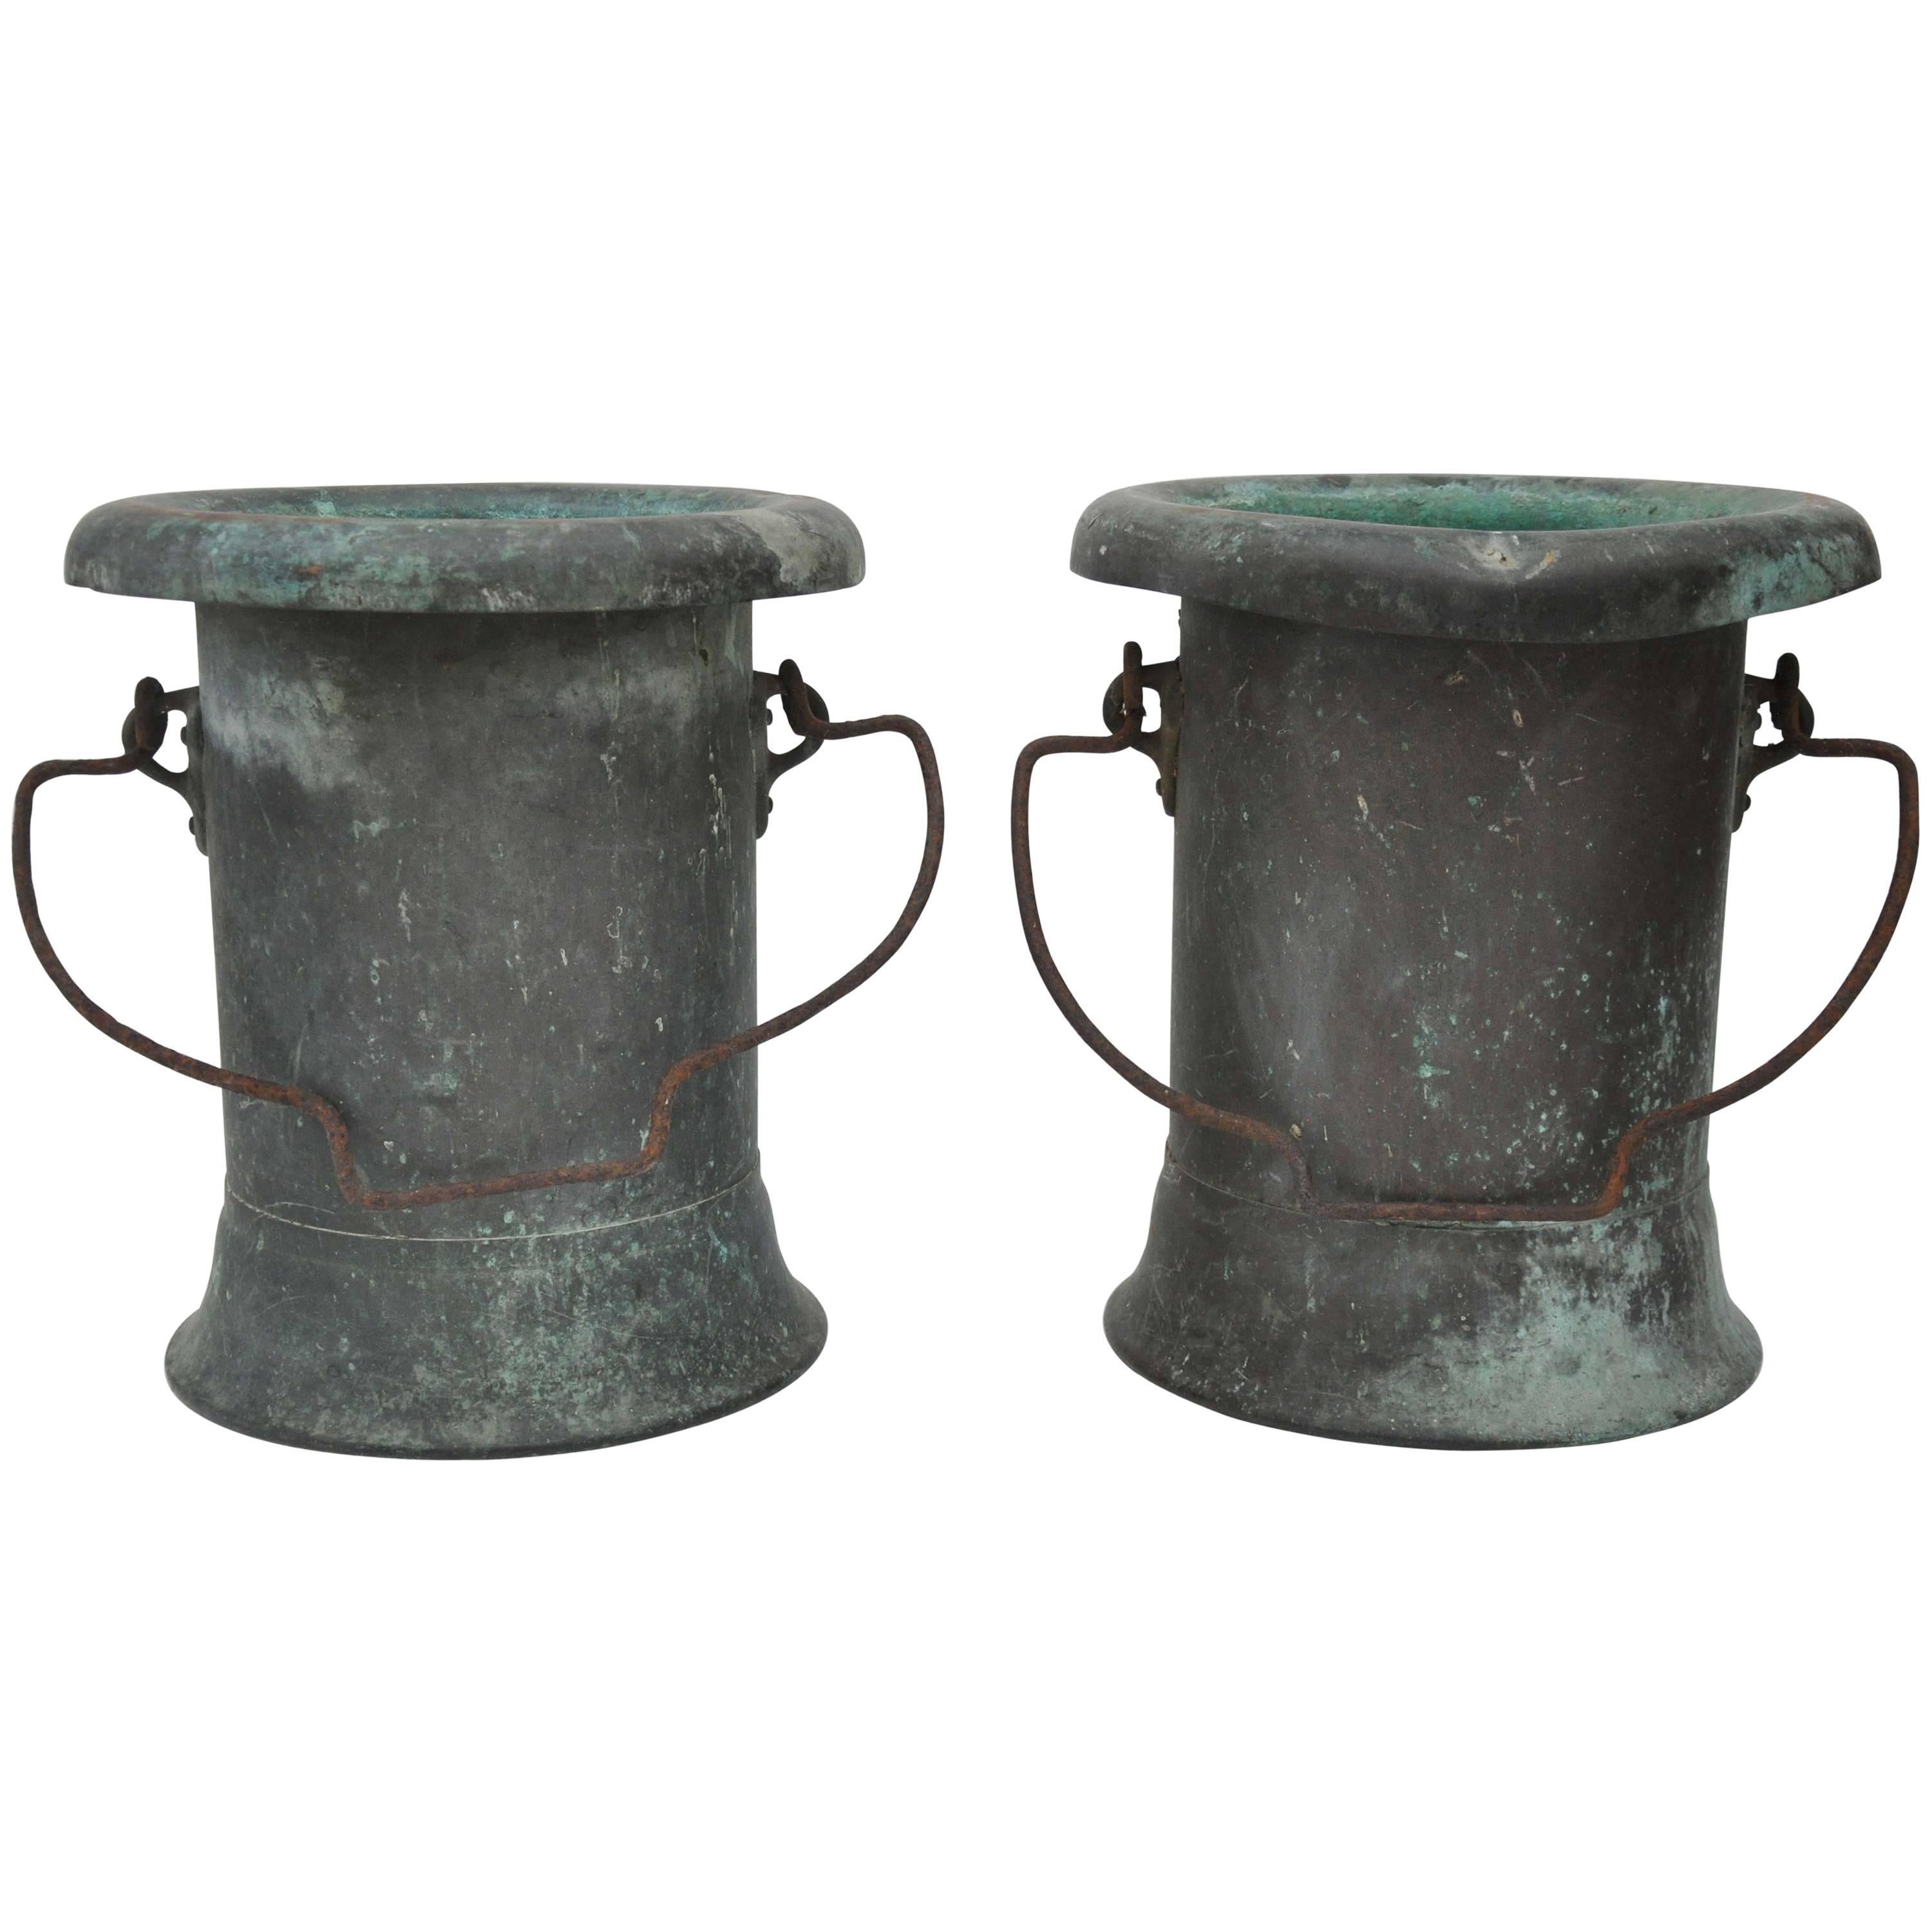 19th Century Pair of Verdigris Vessels from France